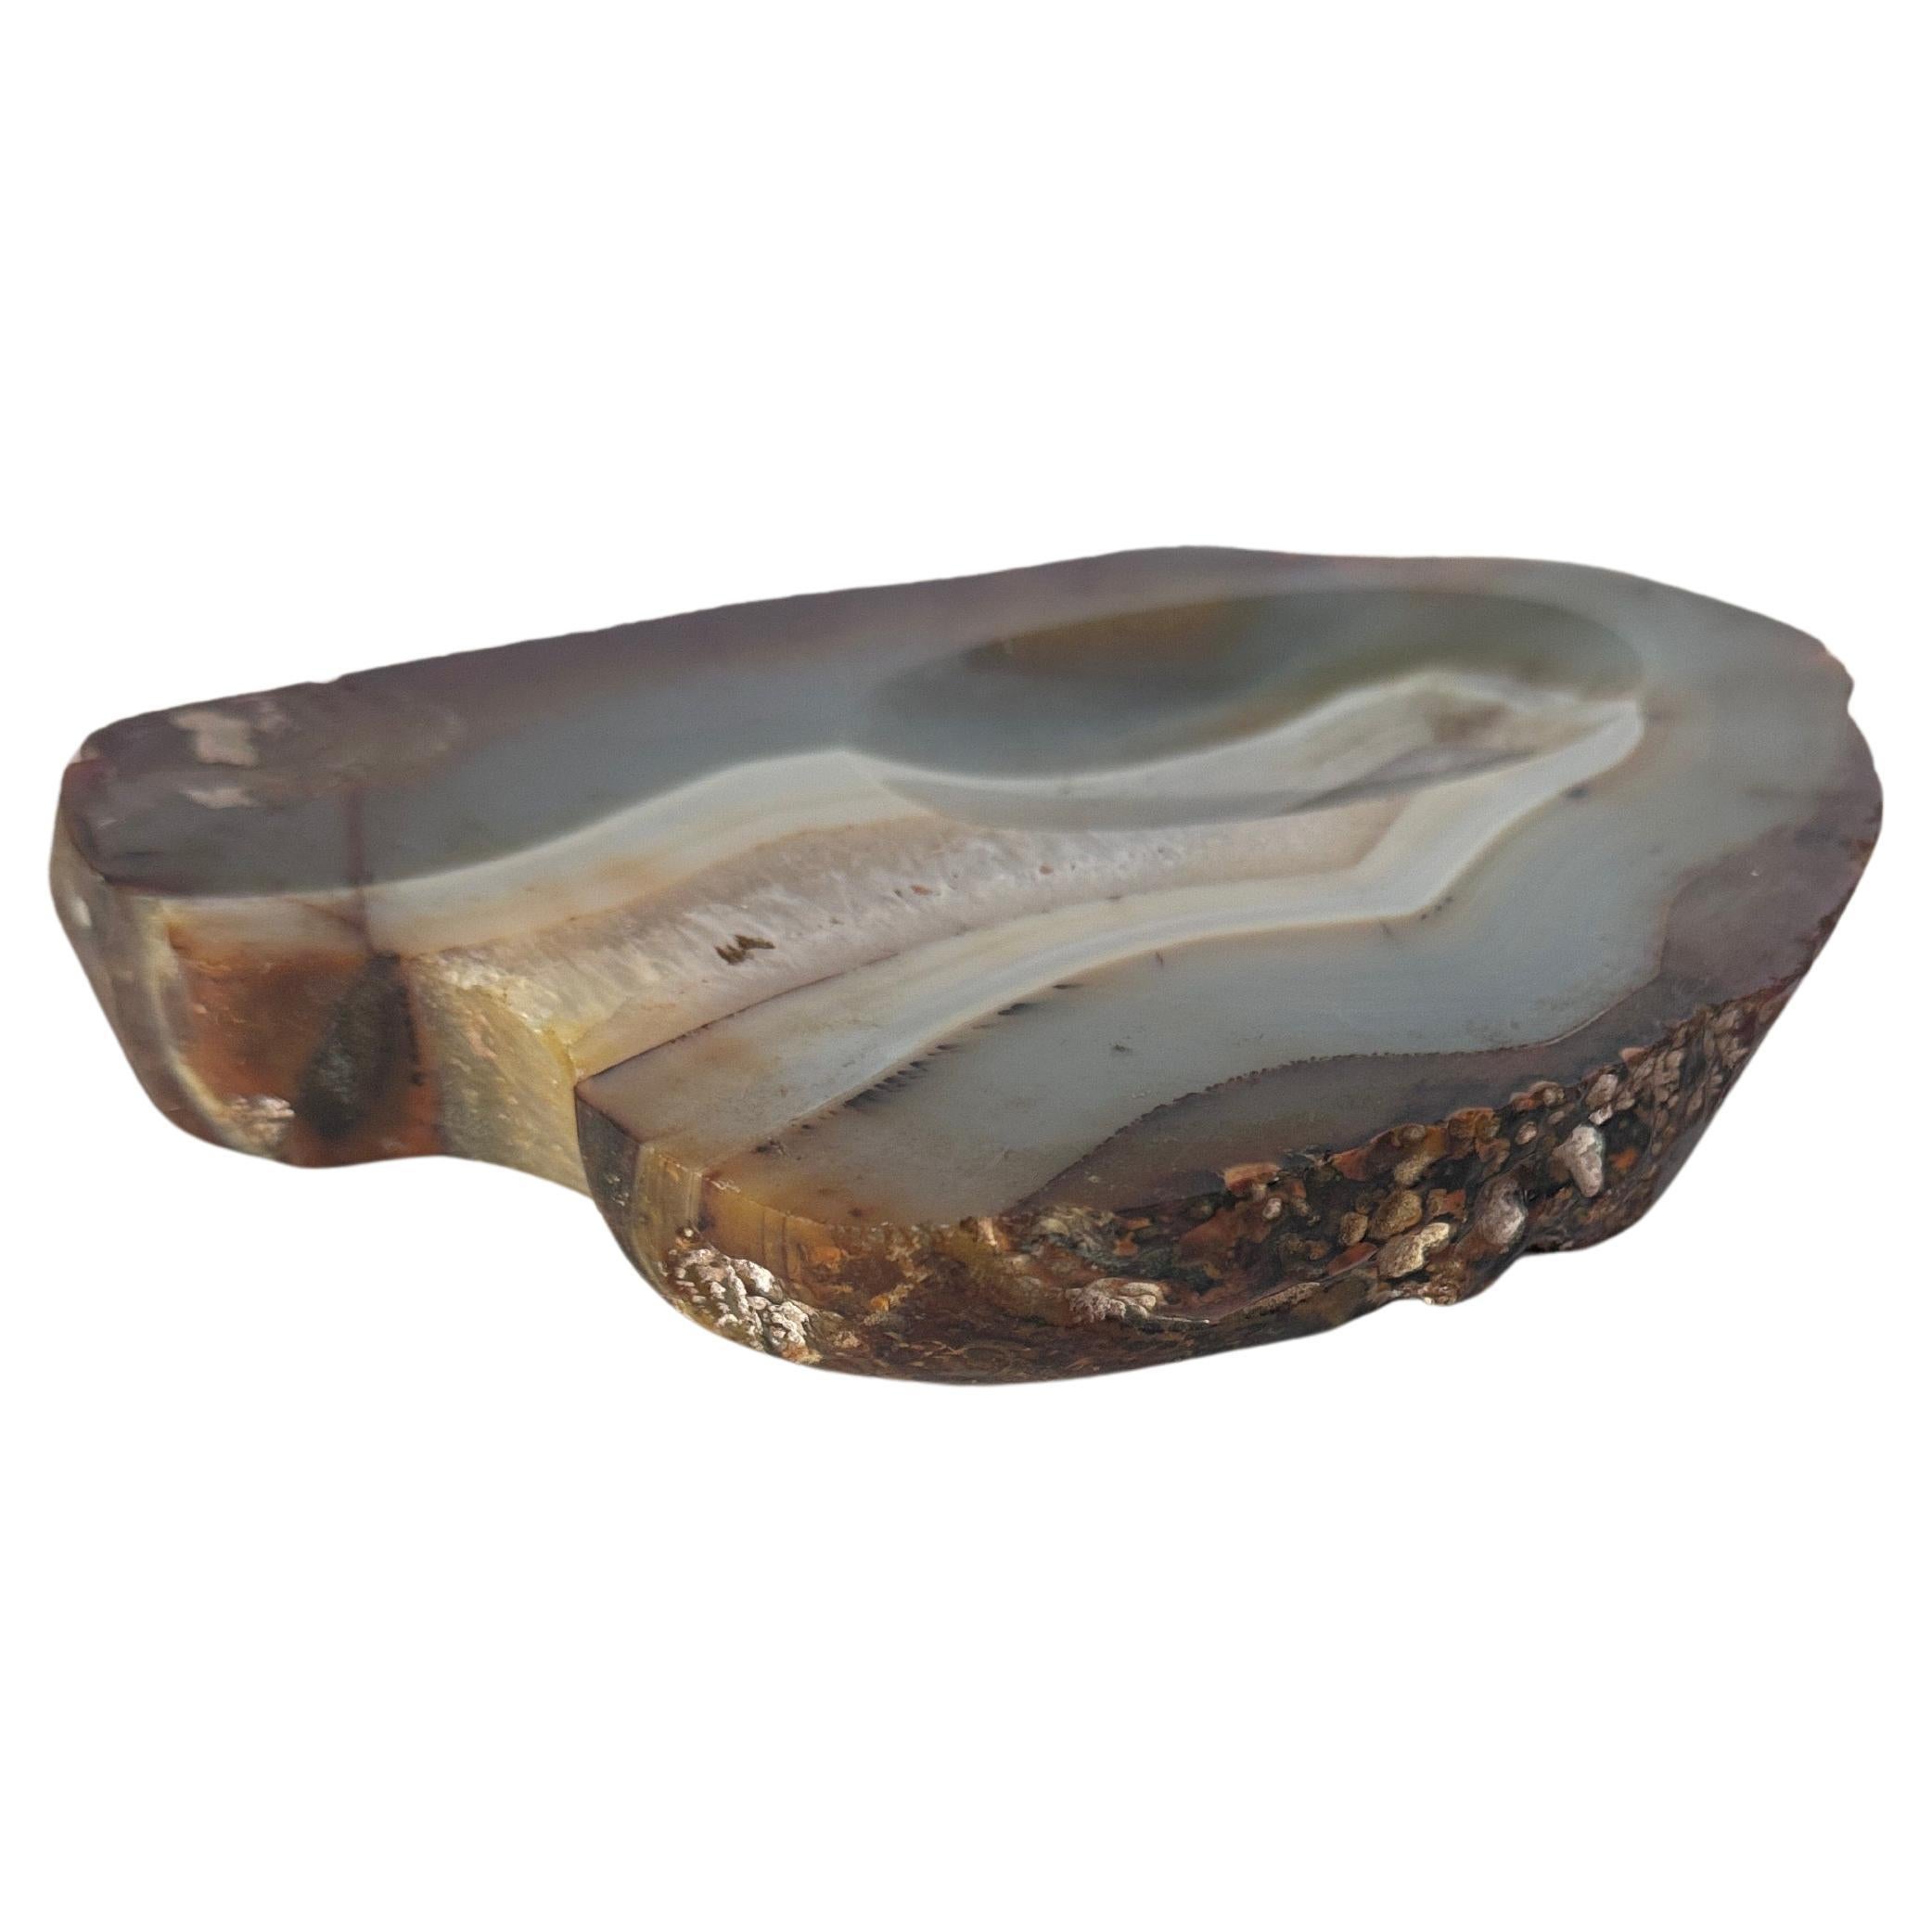 Agate Ashtray or Vide Poche, Grey and Brown Color, Italy 1970